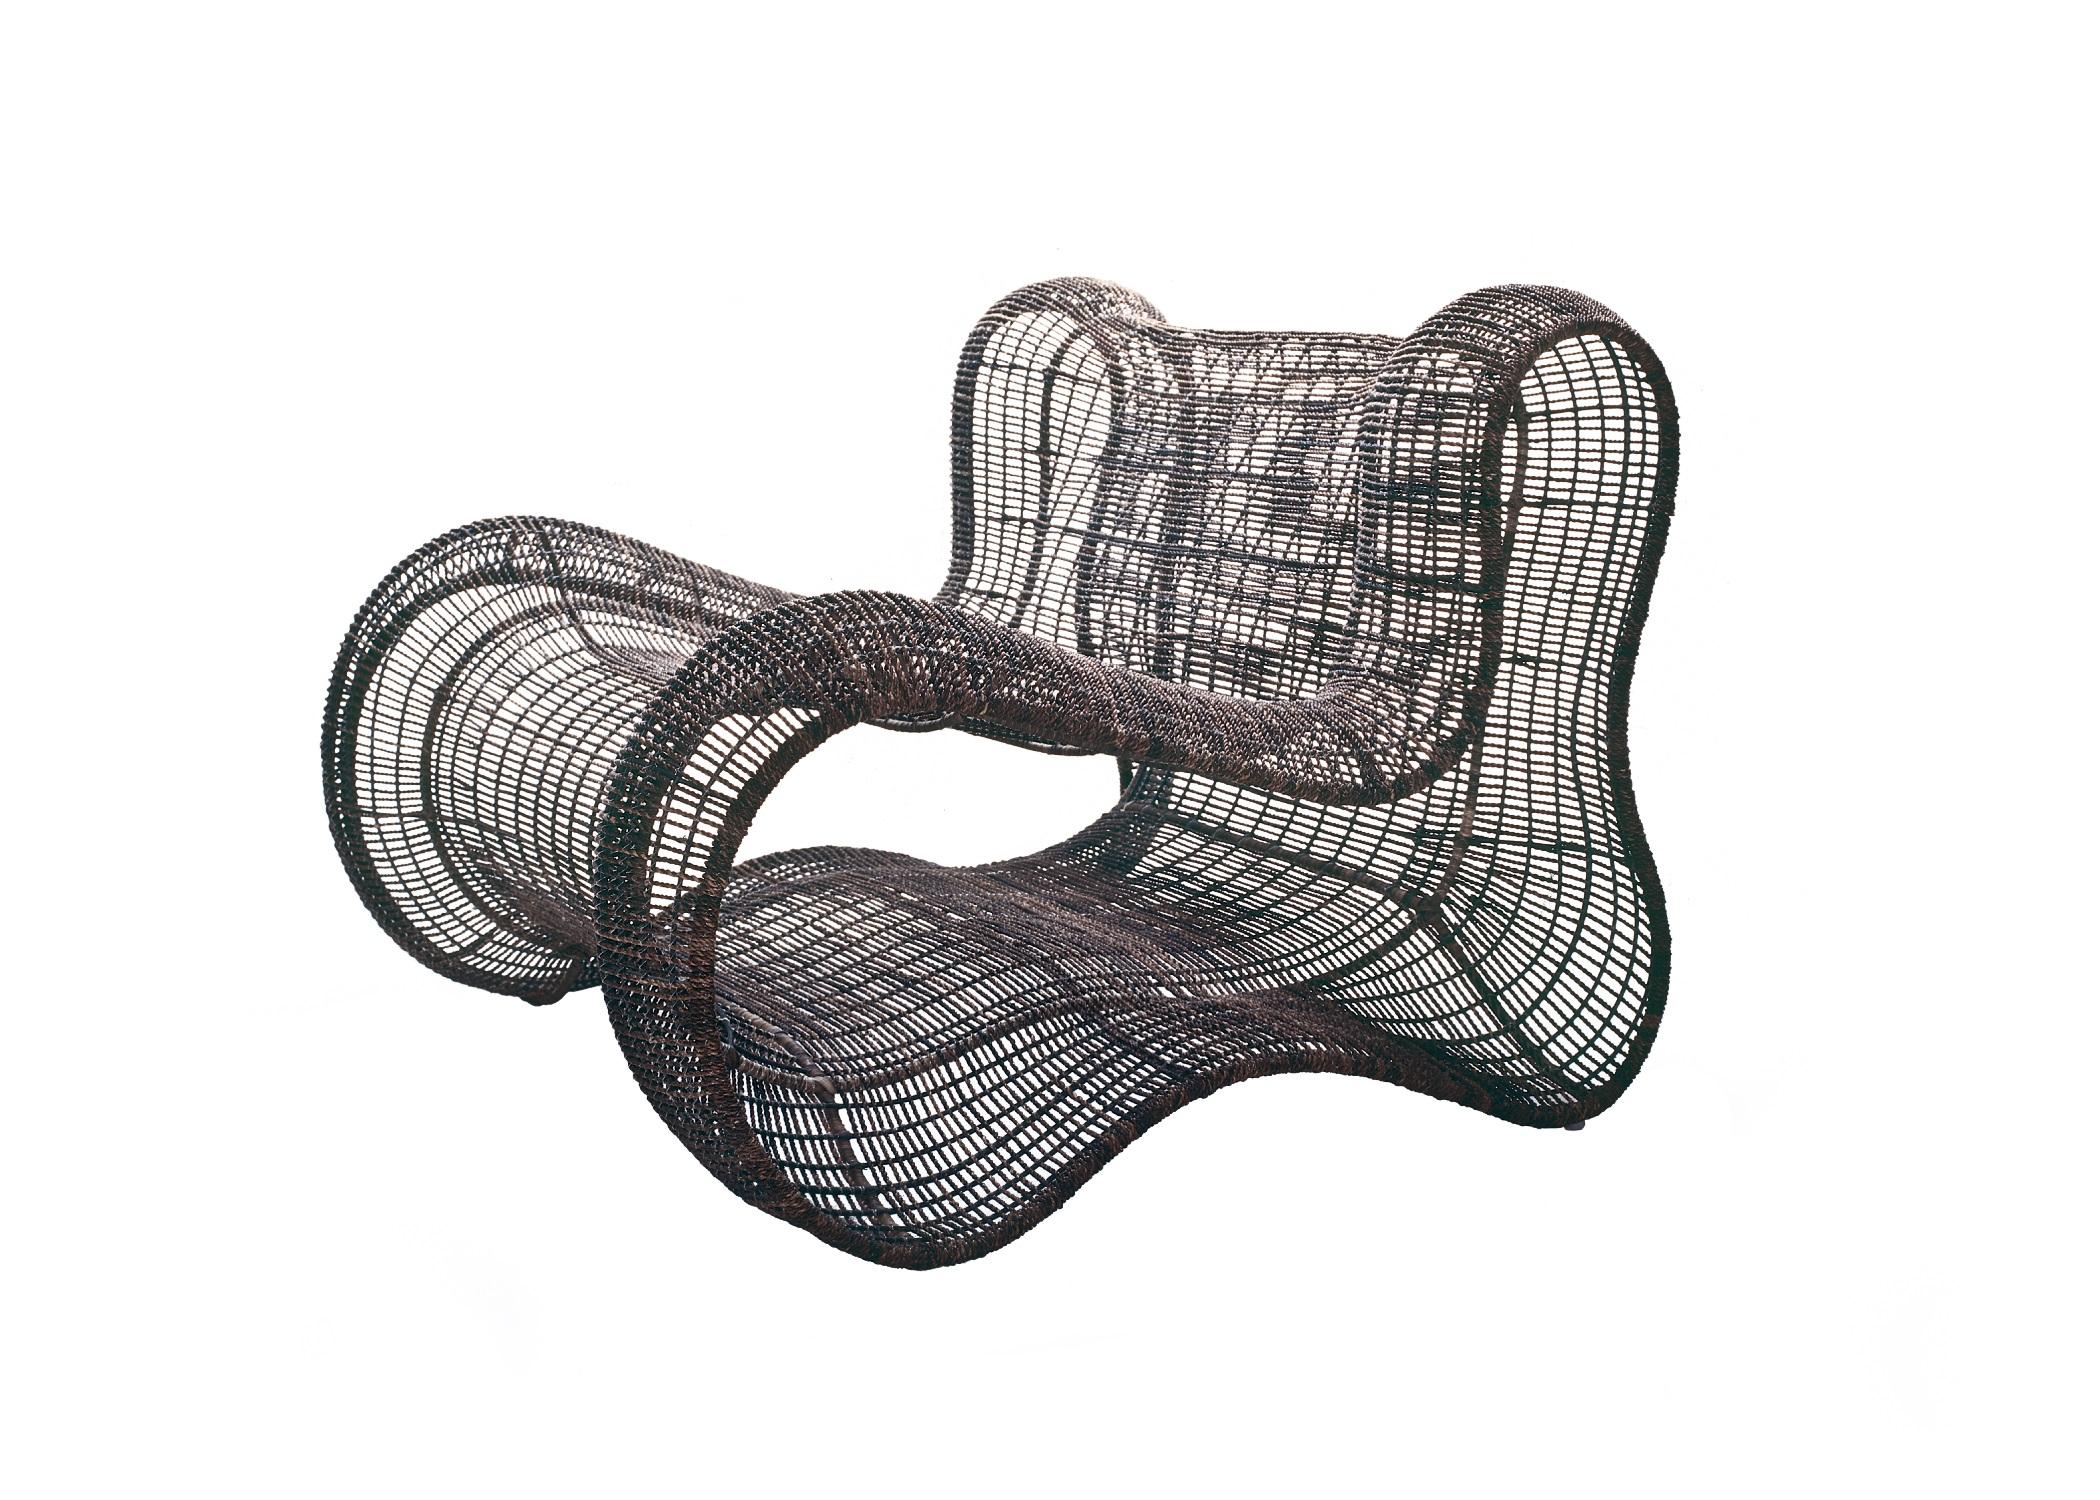 Indoor Pigalle easy armchair by Kenneth Cobonpue.
Materials: Abaca, Nylon, Steel. 
Also available in other colors and for outdoors. Prices for upholstery and fabric upon request.
Dimensions: 100 cm x 97 cm x H 77.5 cm 

Experience the